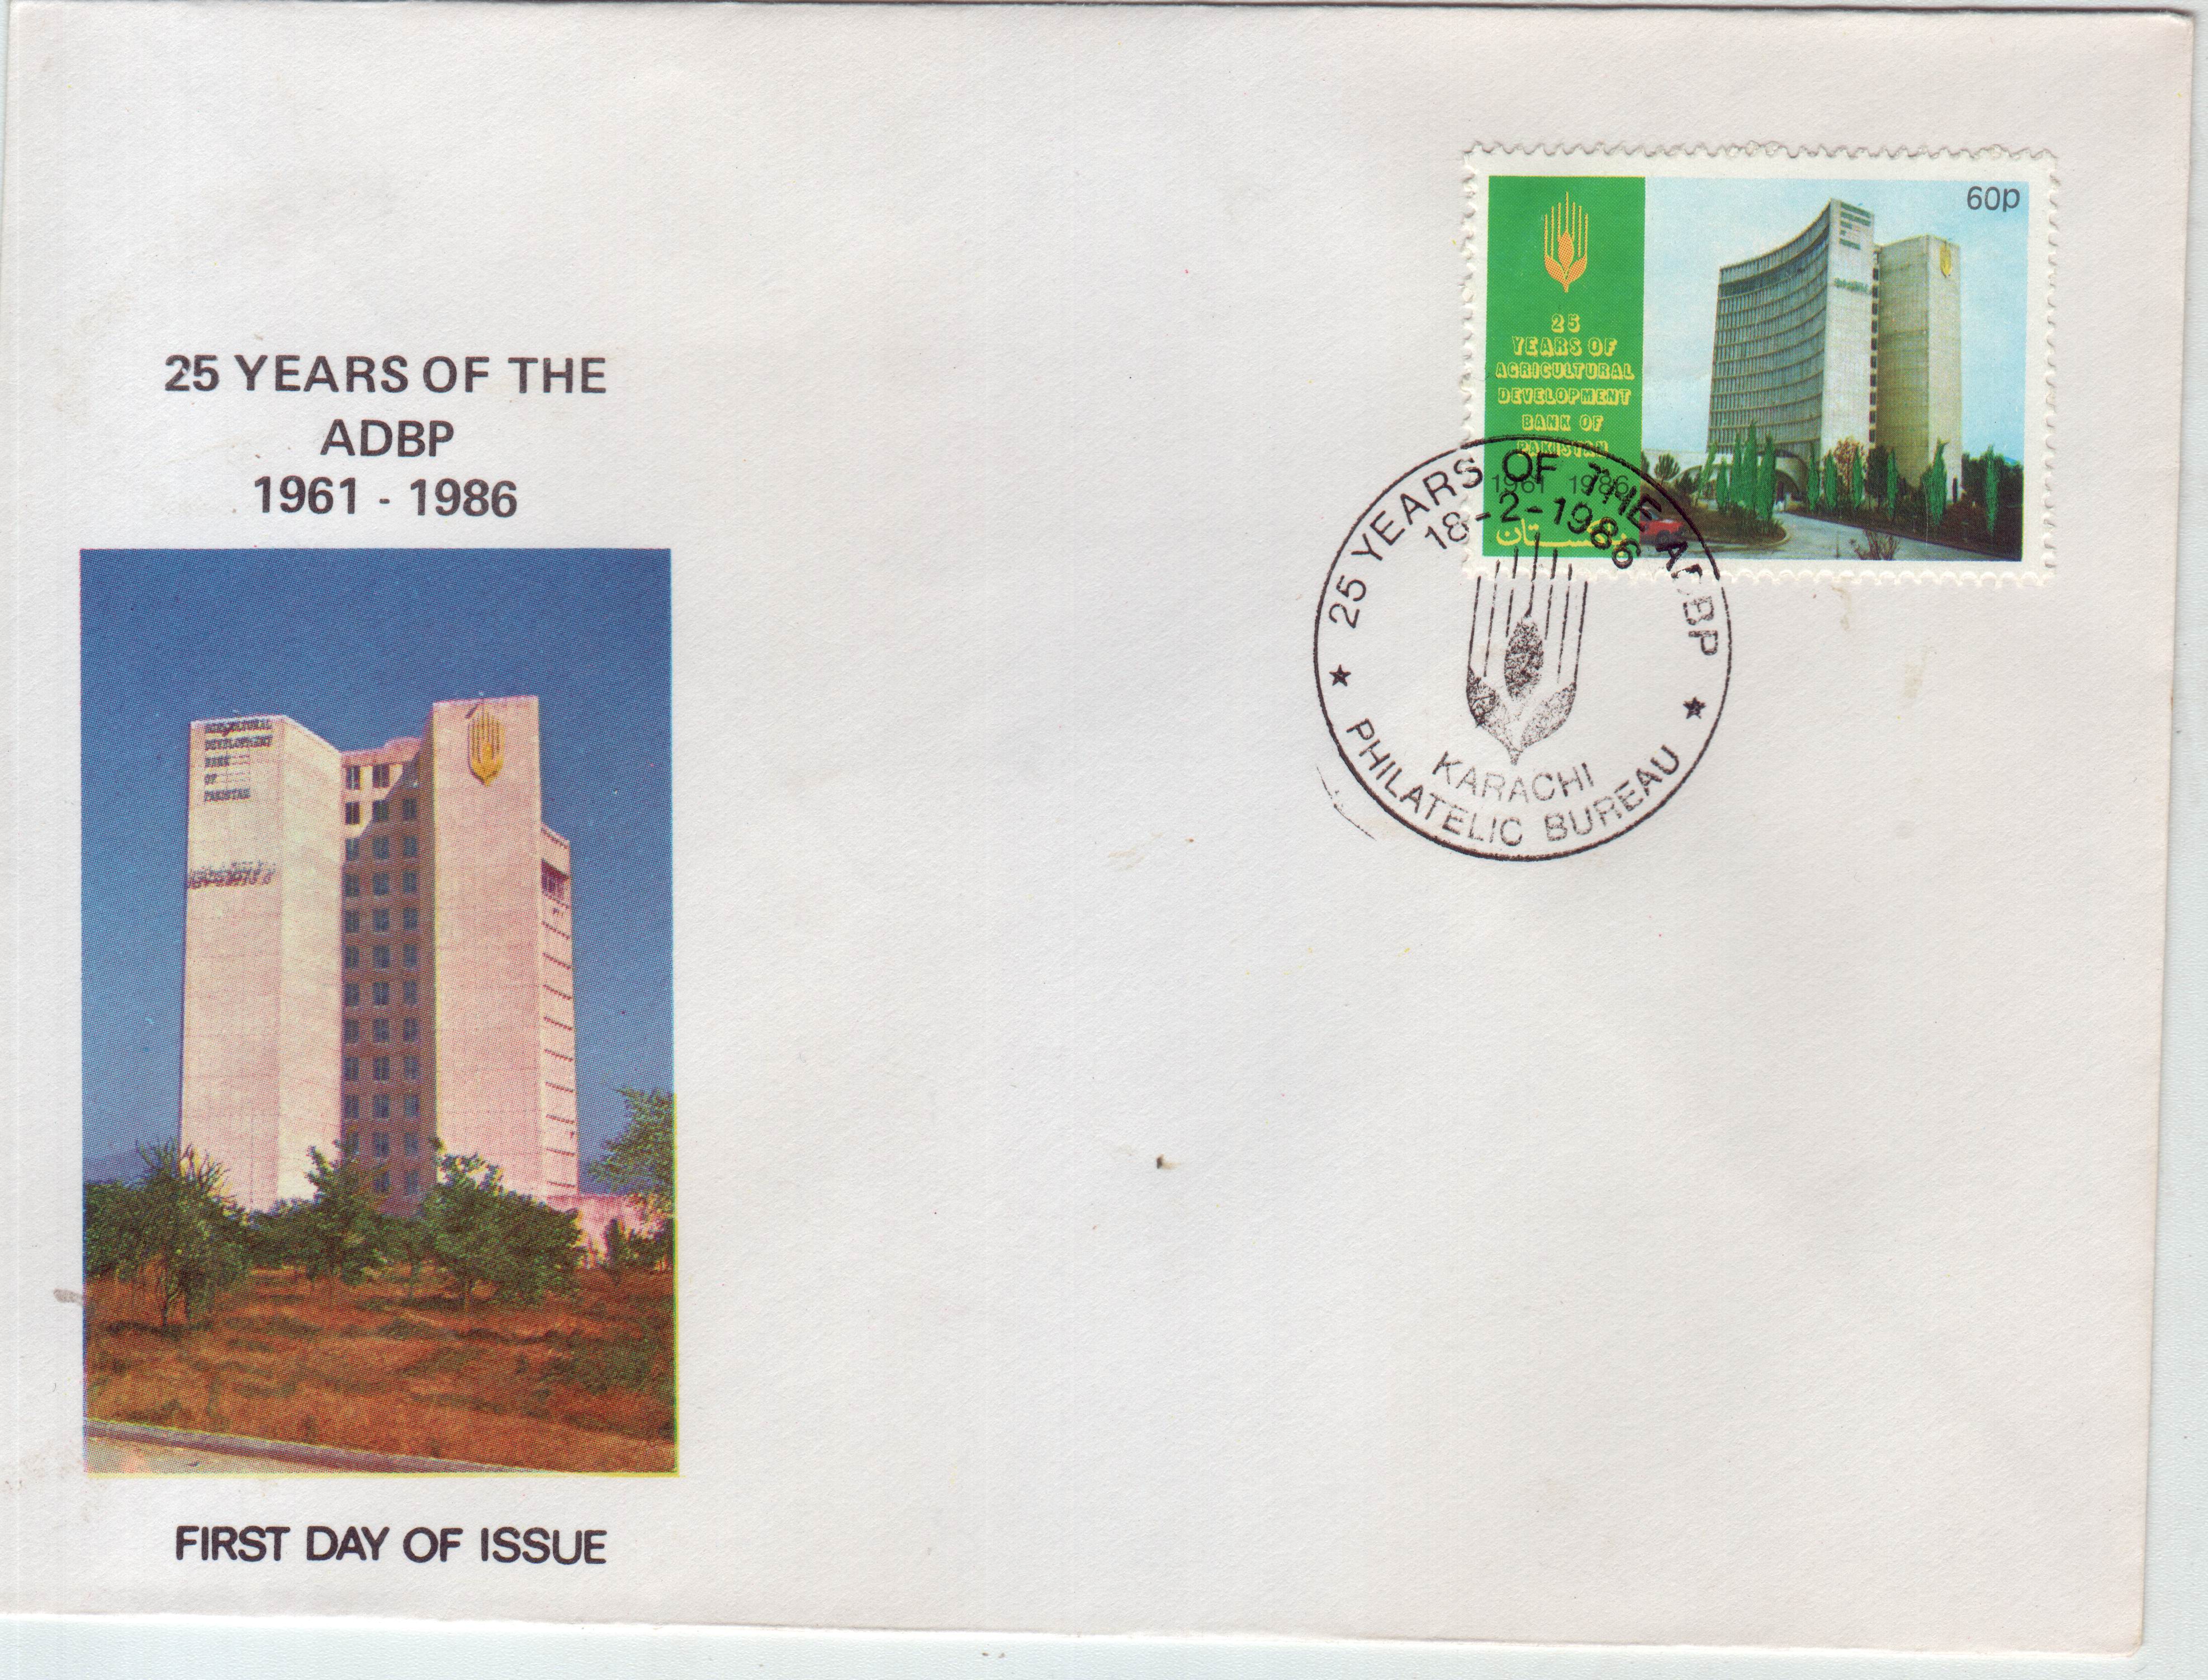 Pakistan Fdc 1986 Brochure & Stamp ADBP - Click Image to Close